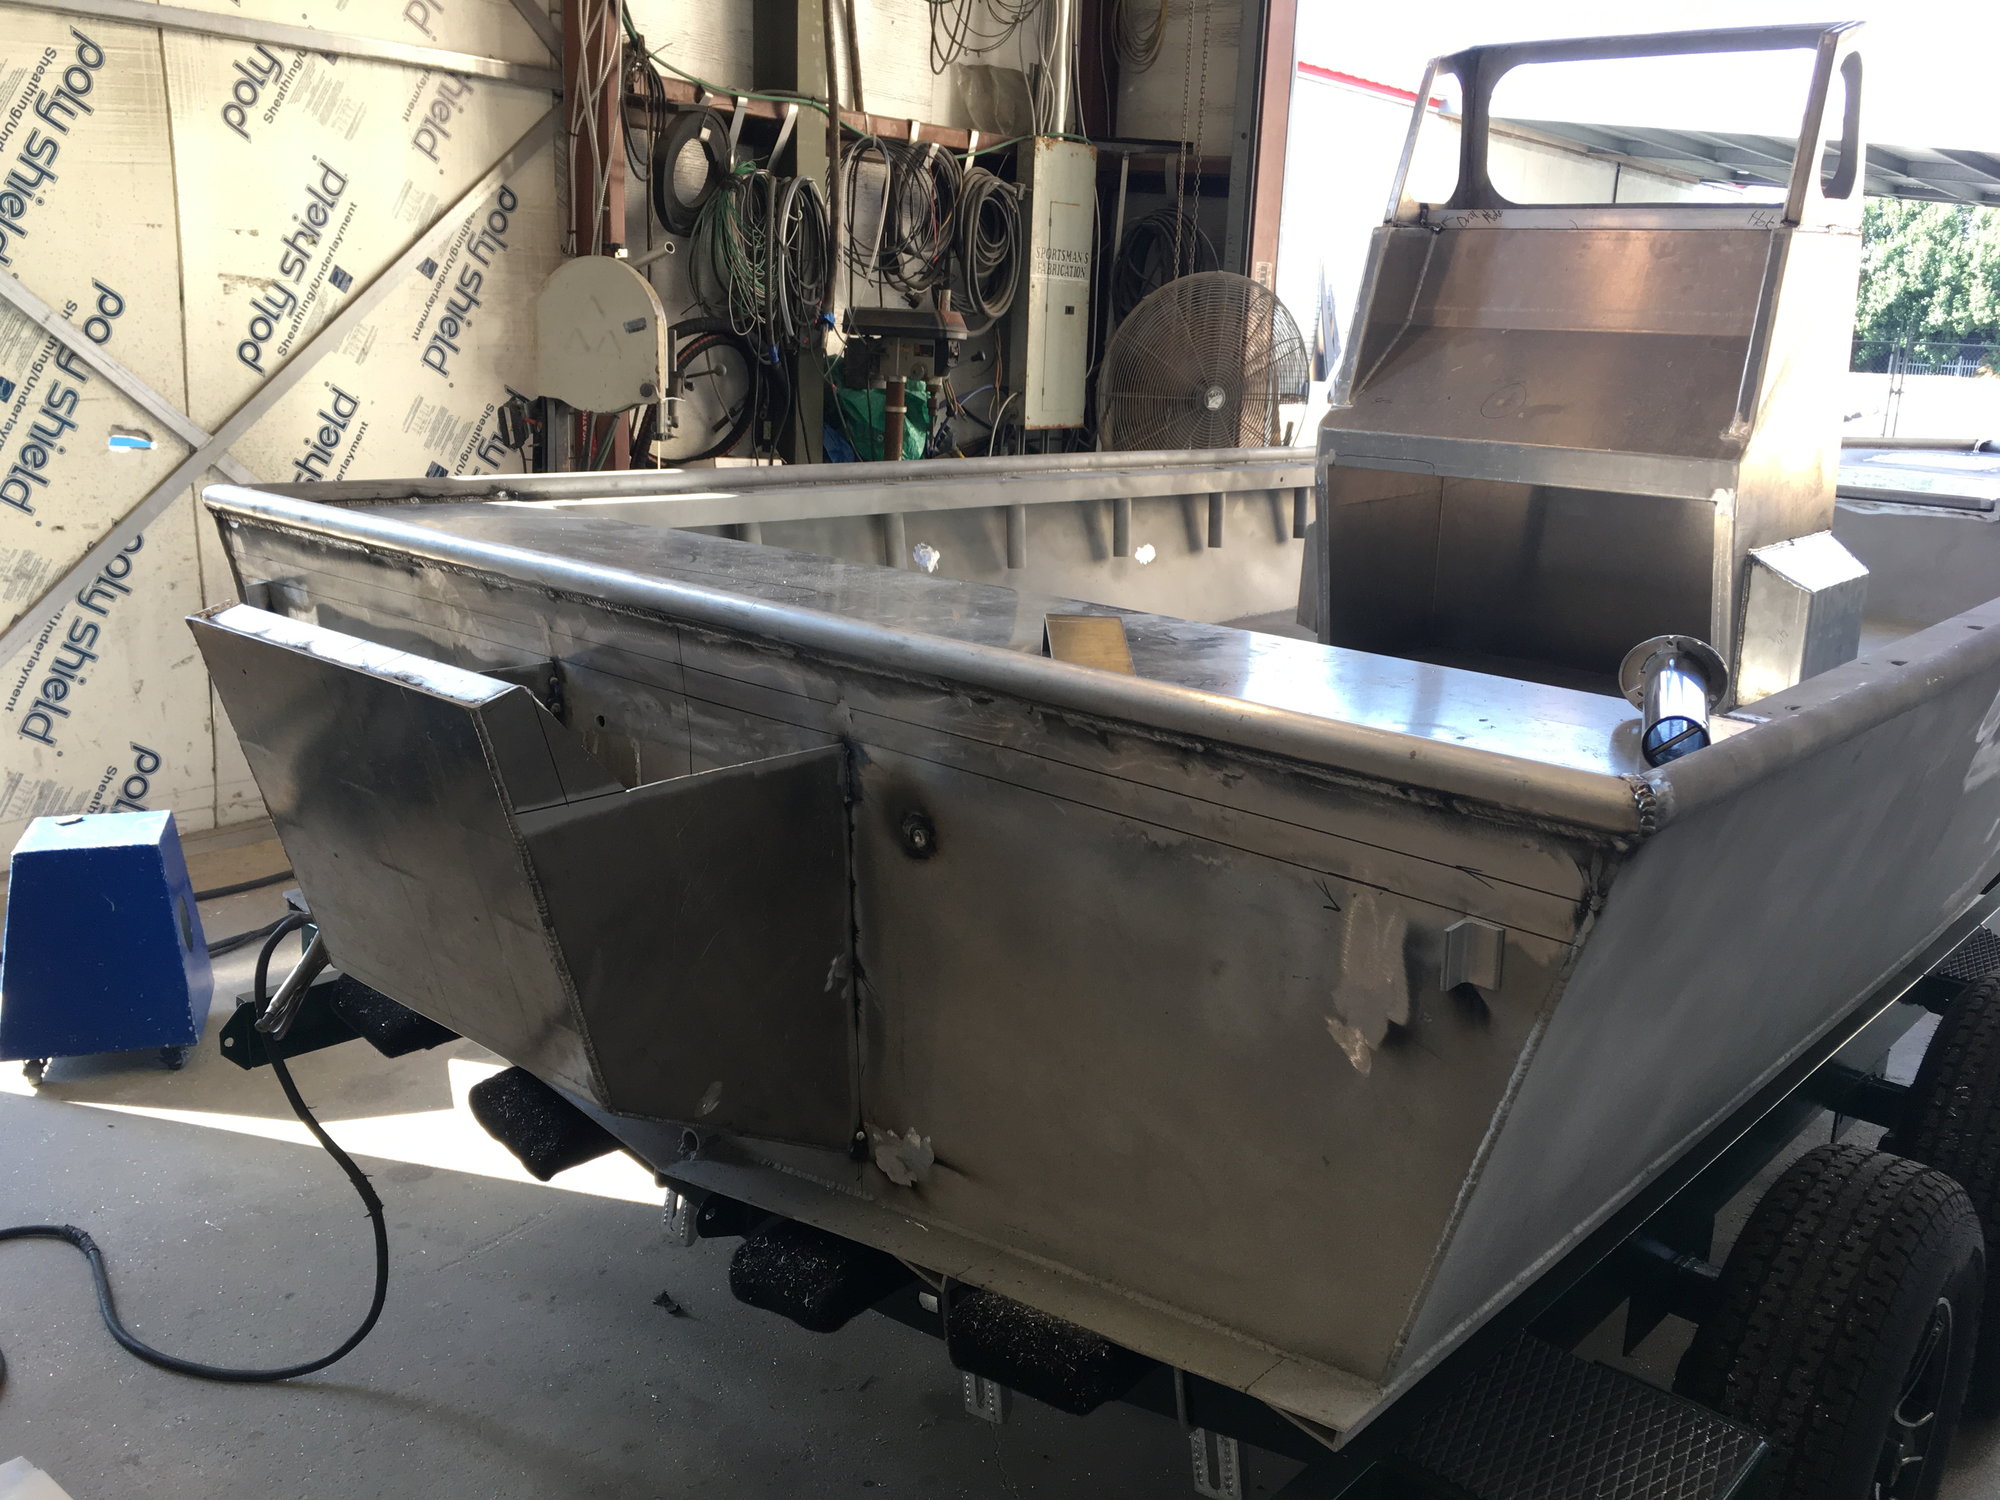 20ft Homemade Aluminum Bay Boat Rebuild The Hull Truth Boating And